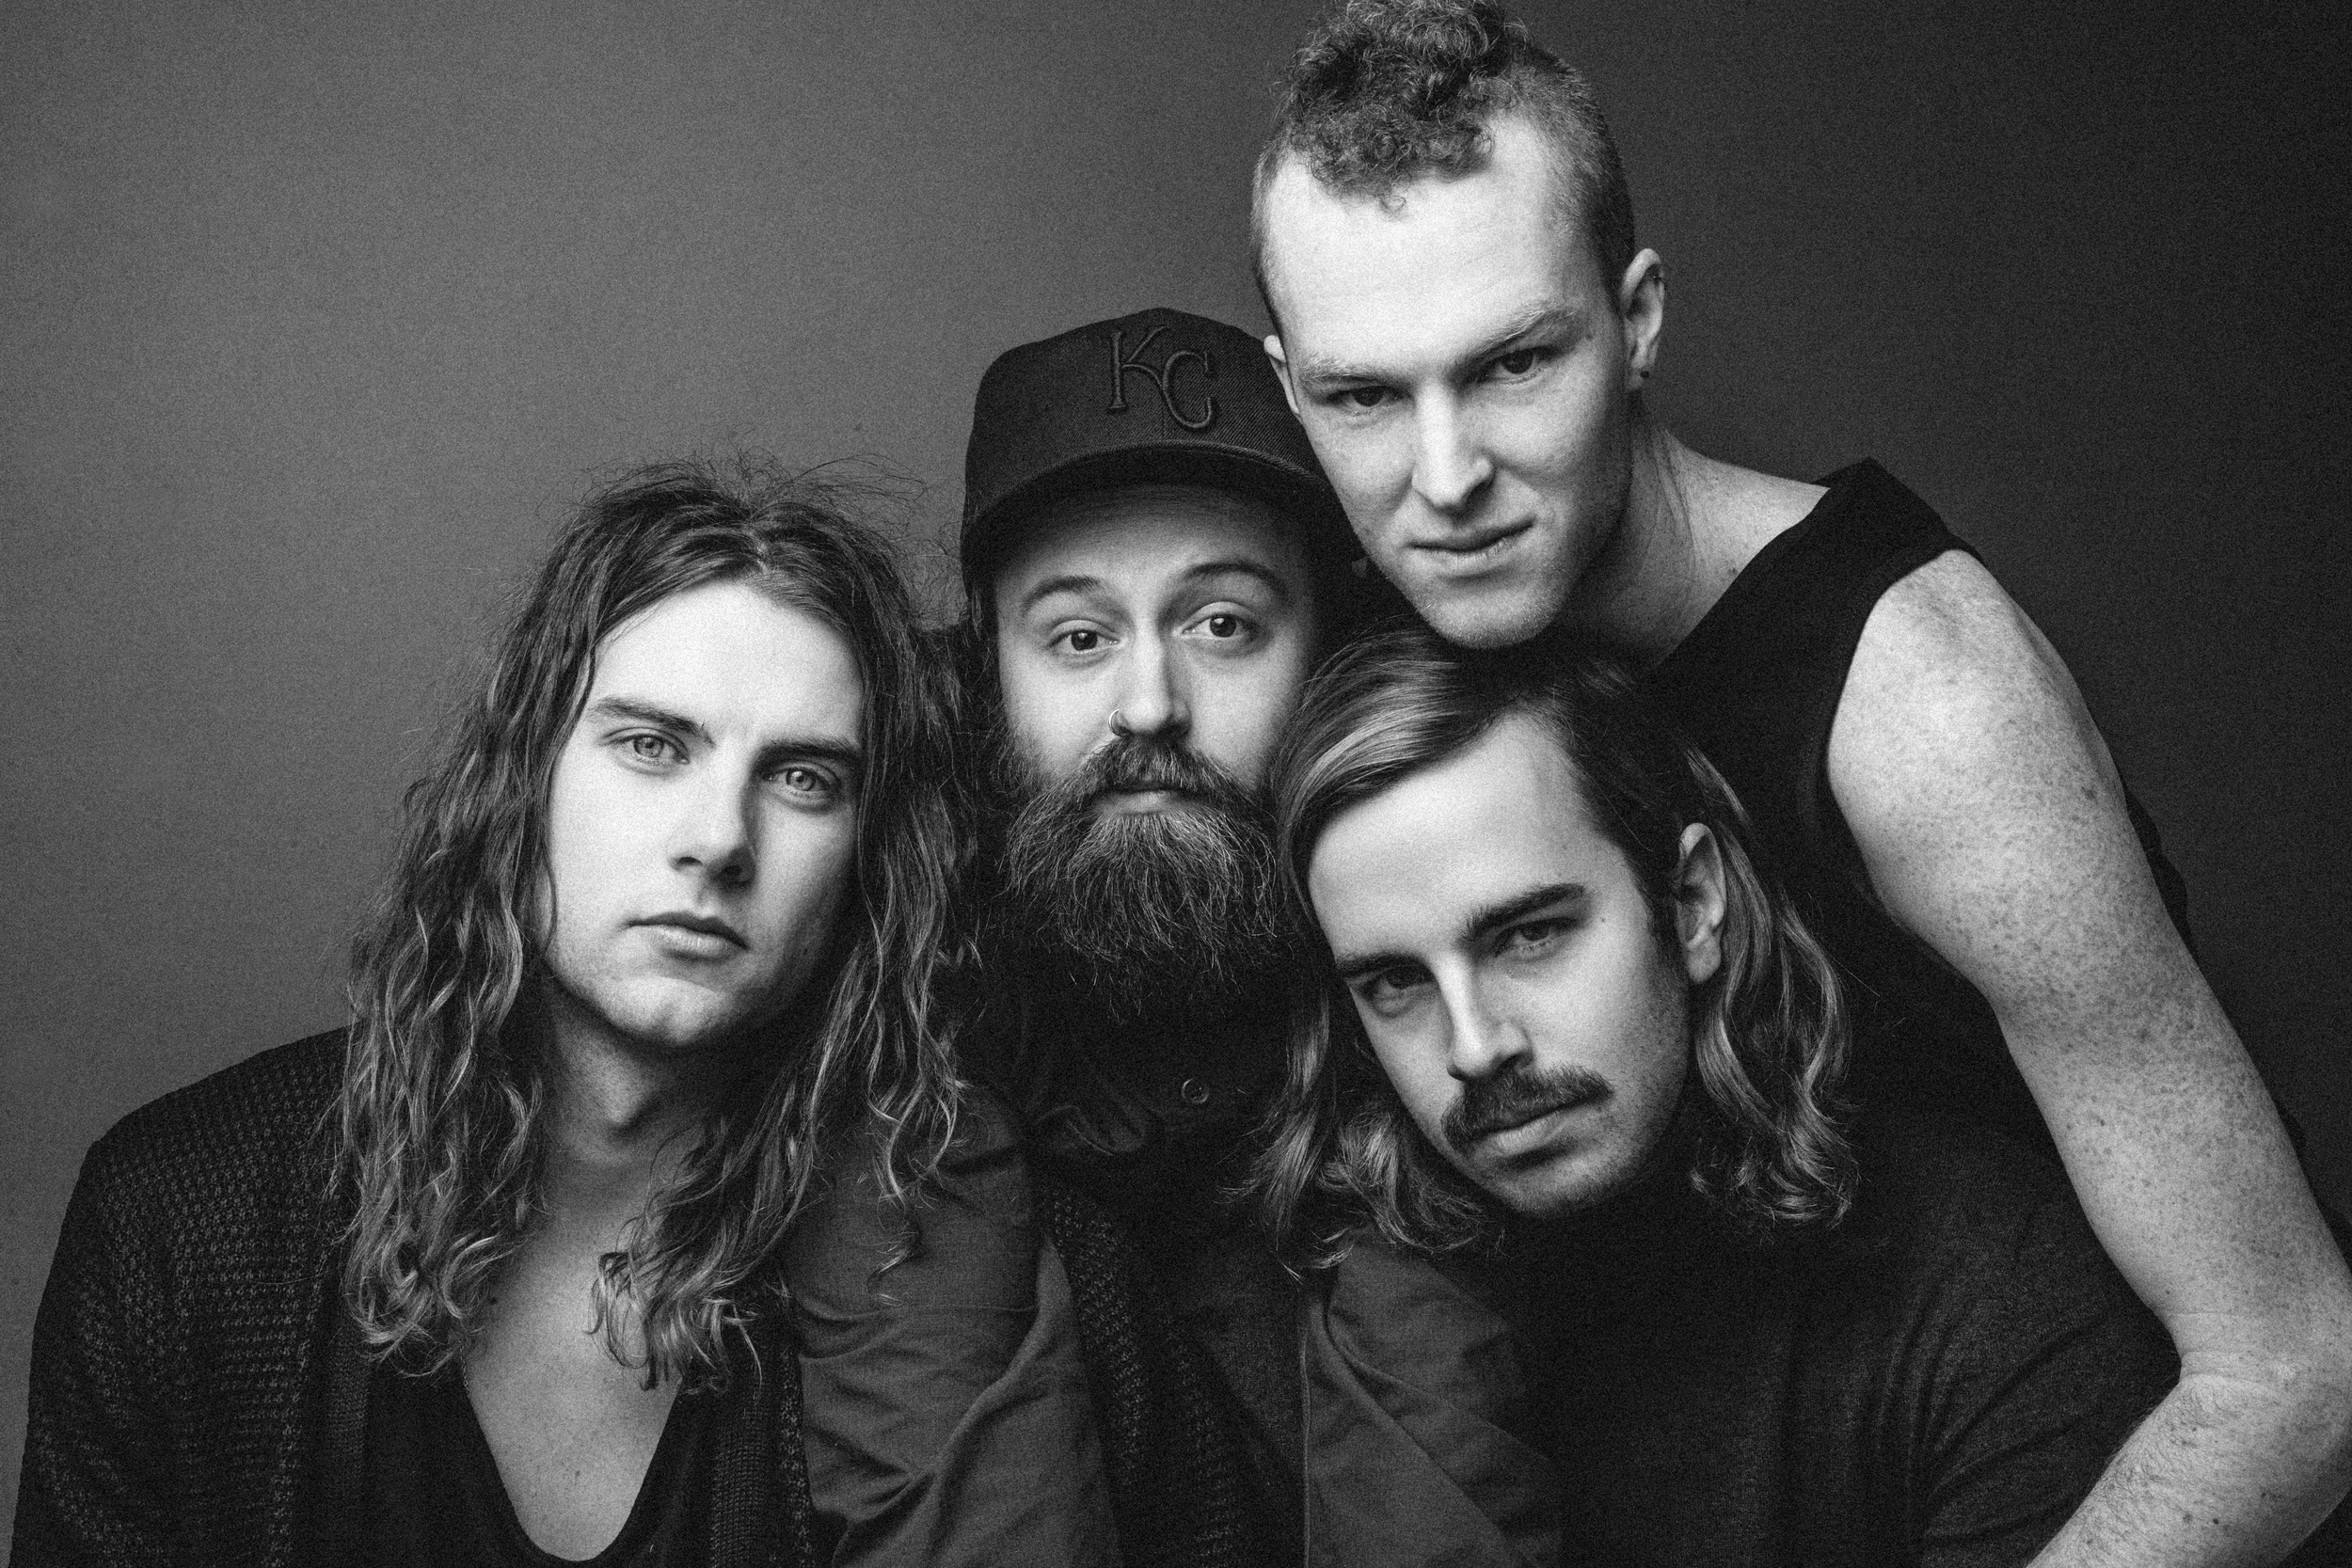  Judah and the Lion    